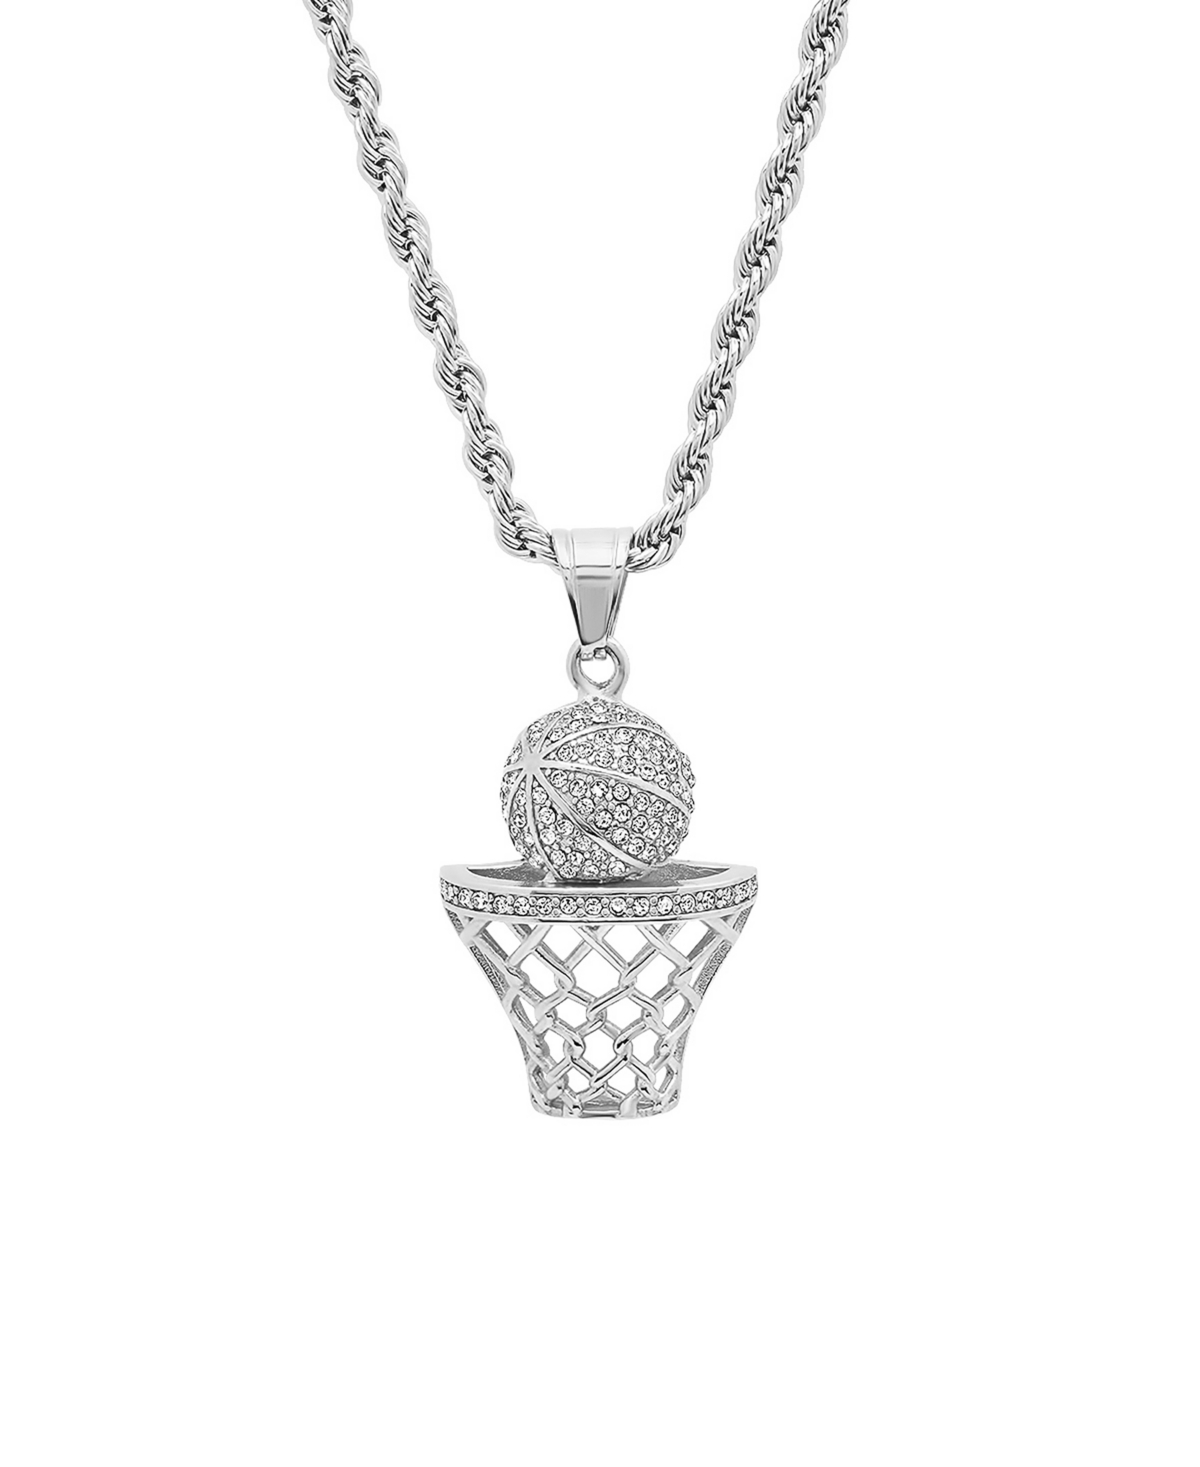 Men's Stainless Steel Simulated Diamond Basketball and Hoop Pendant - Silver-tone